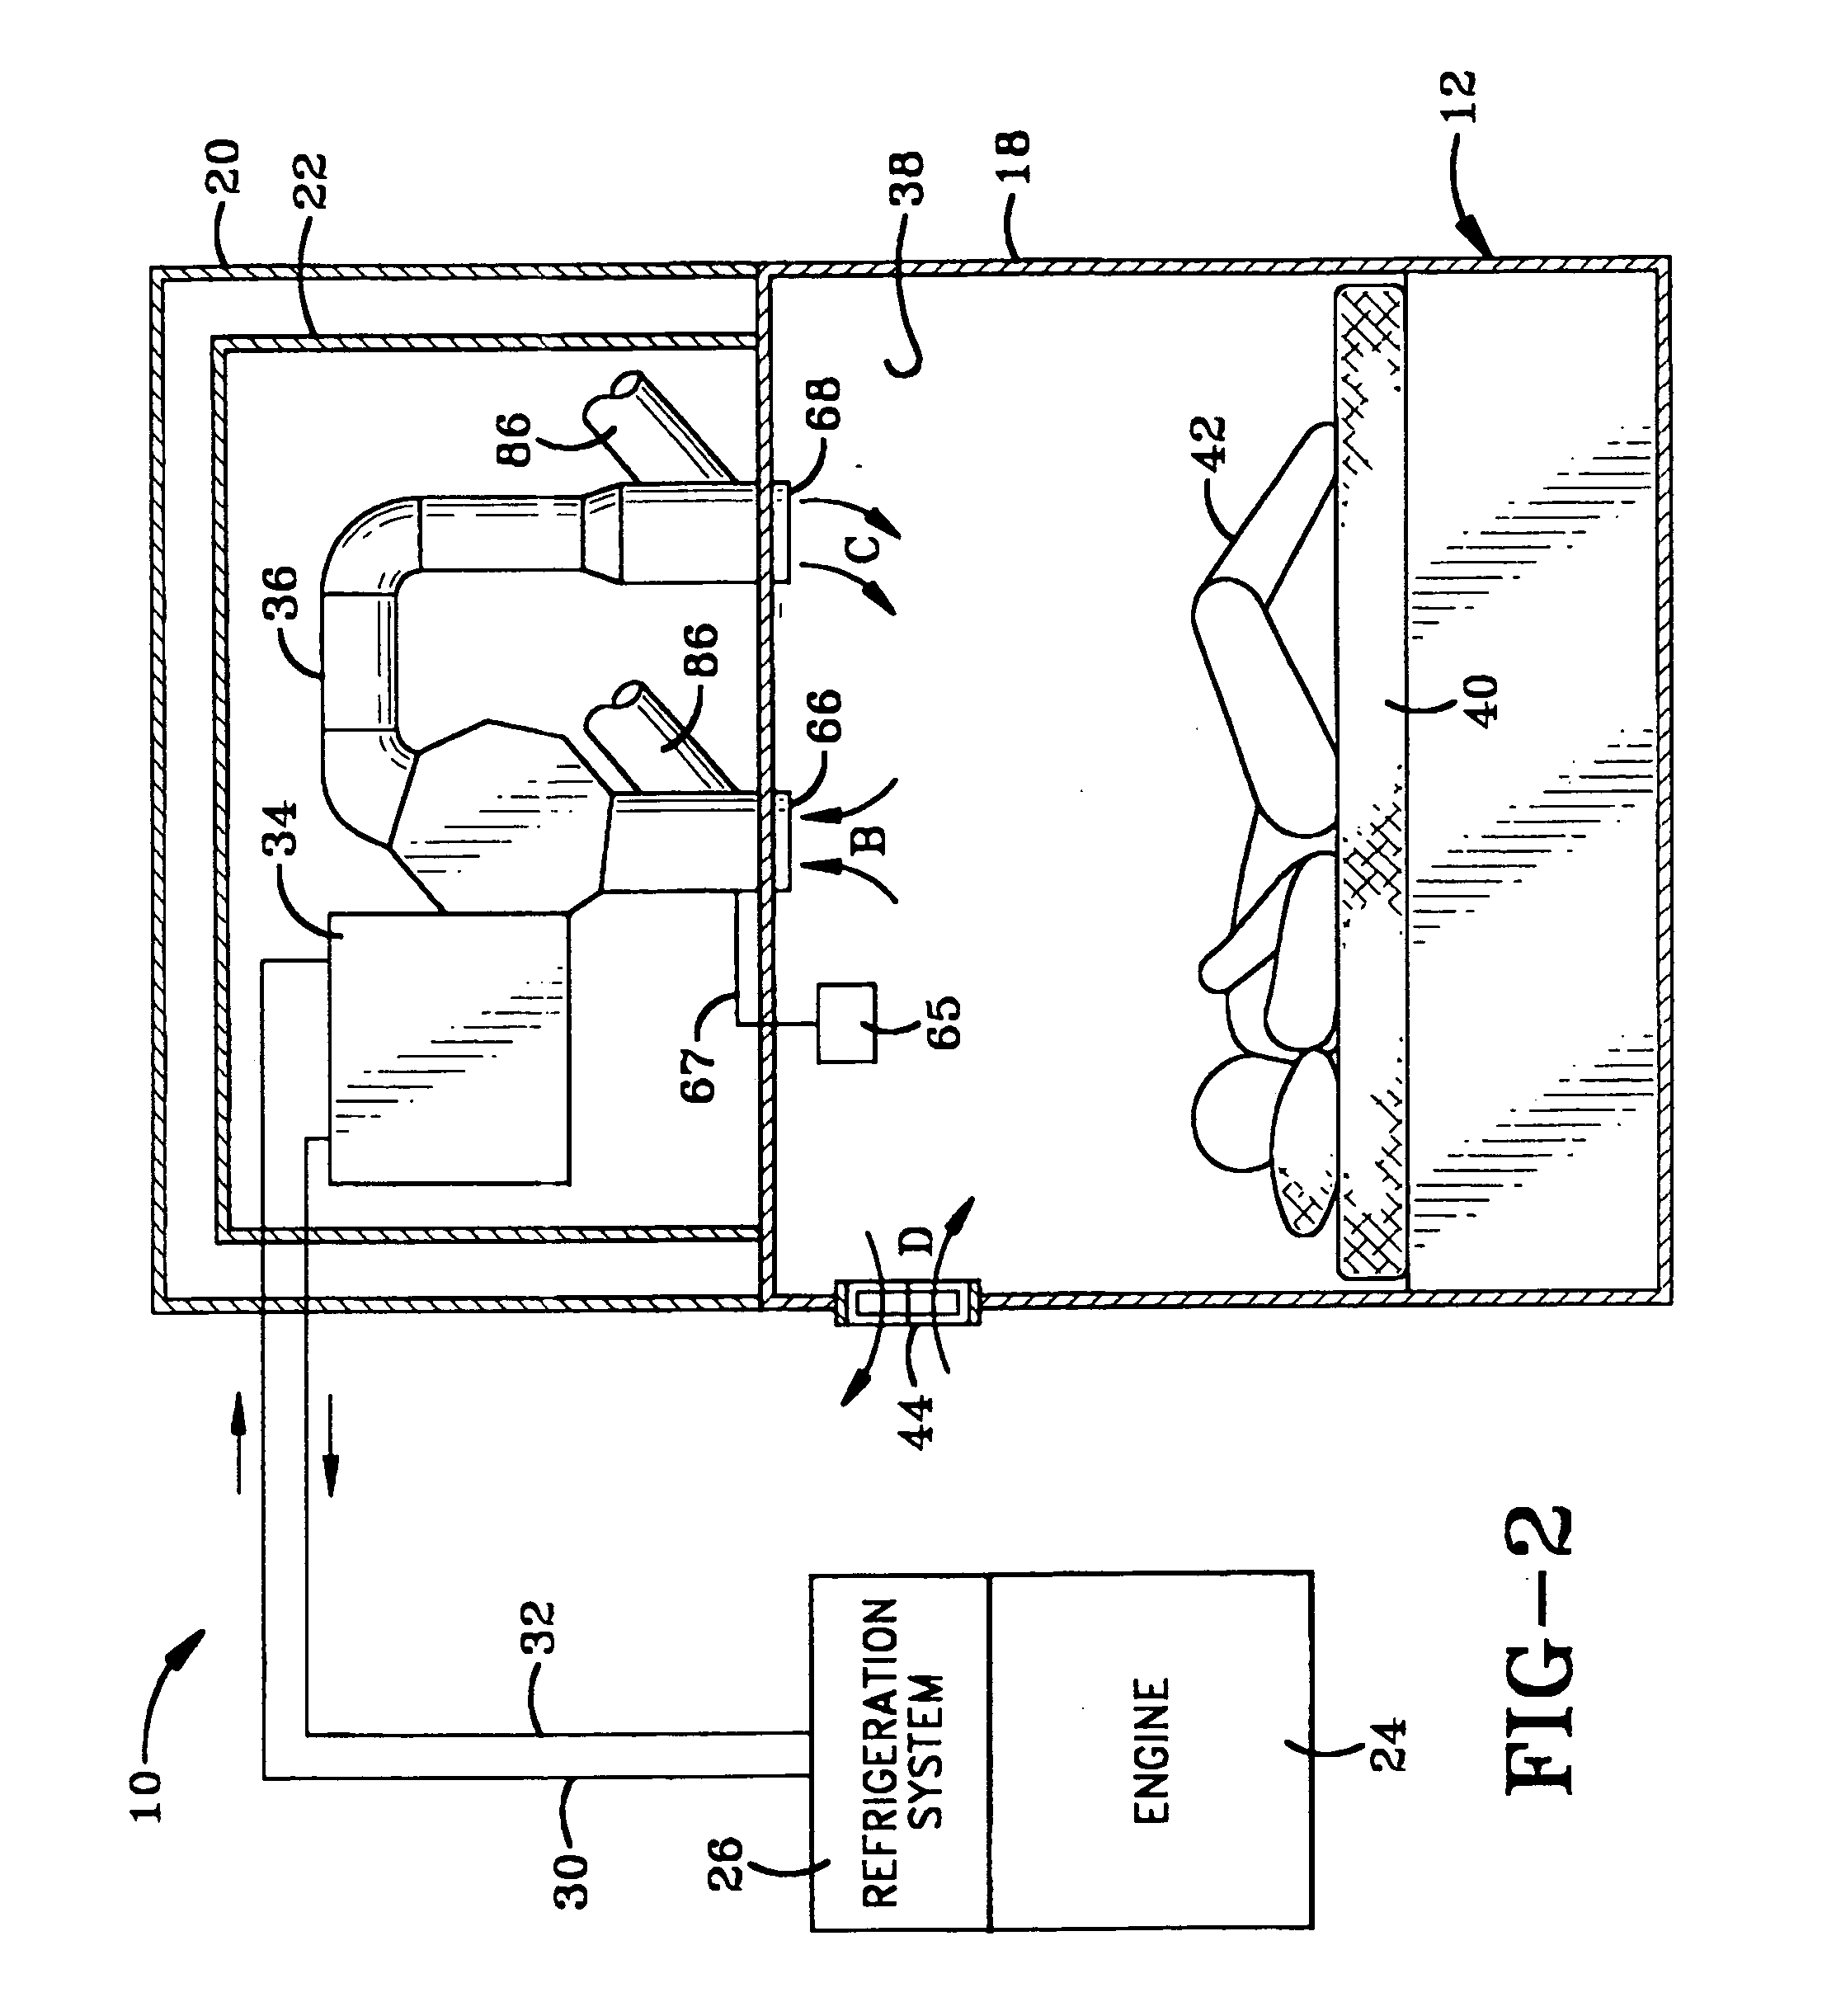 Method and apparatus for thermal storage using heat pipes